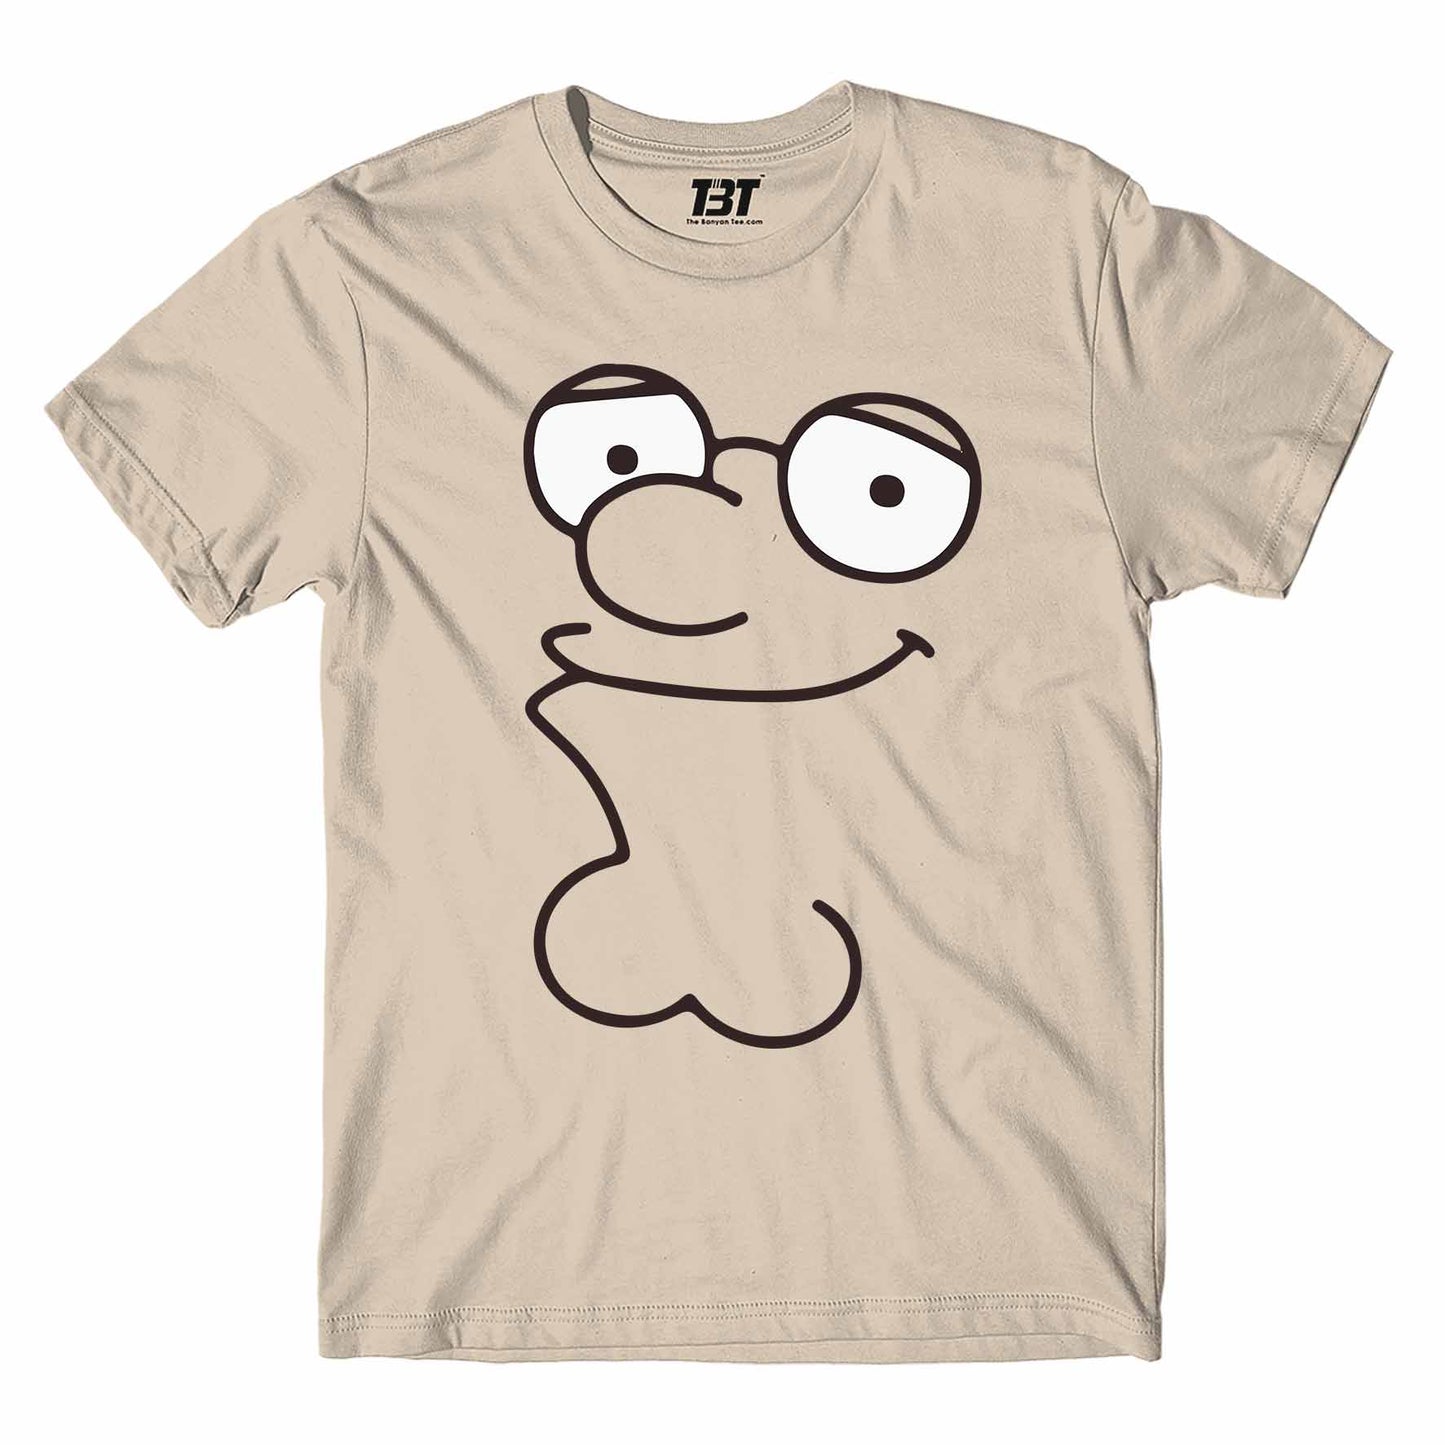 family guy peter t-shirt tv & movies buy online united states usa the banyan tee tbt men women girls boys unisex beige griffin